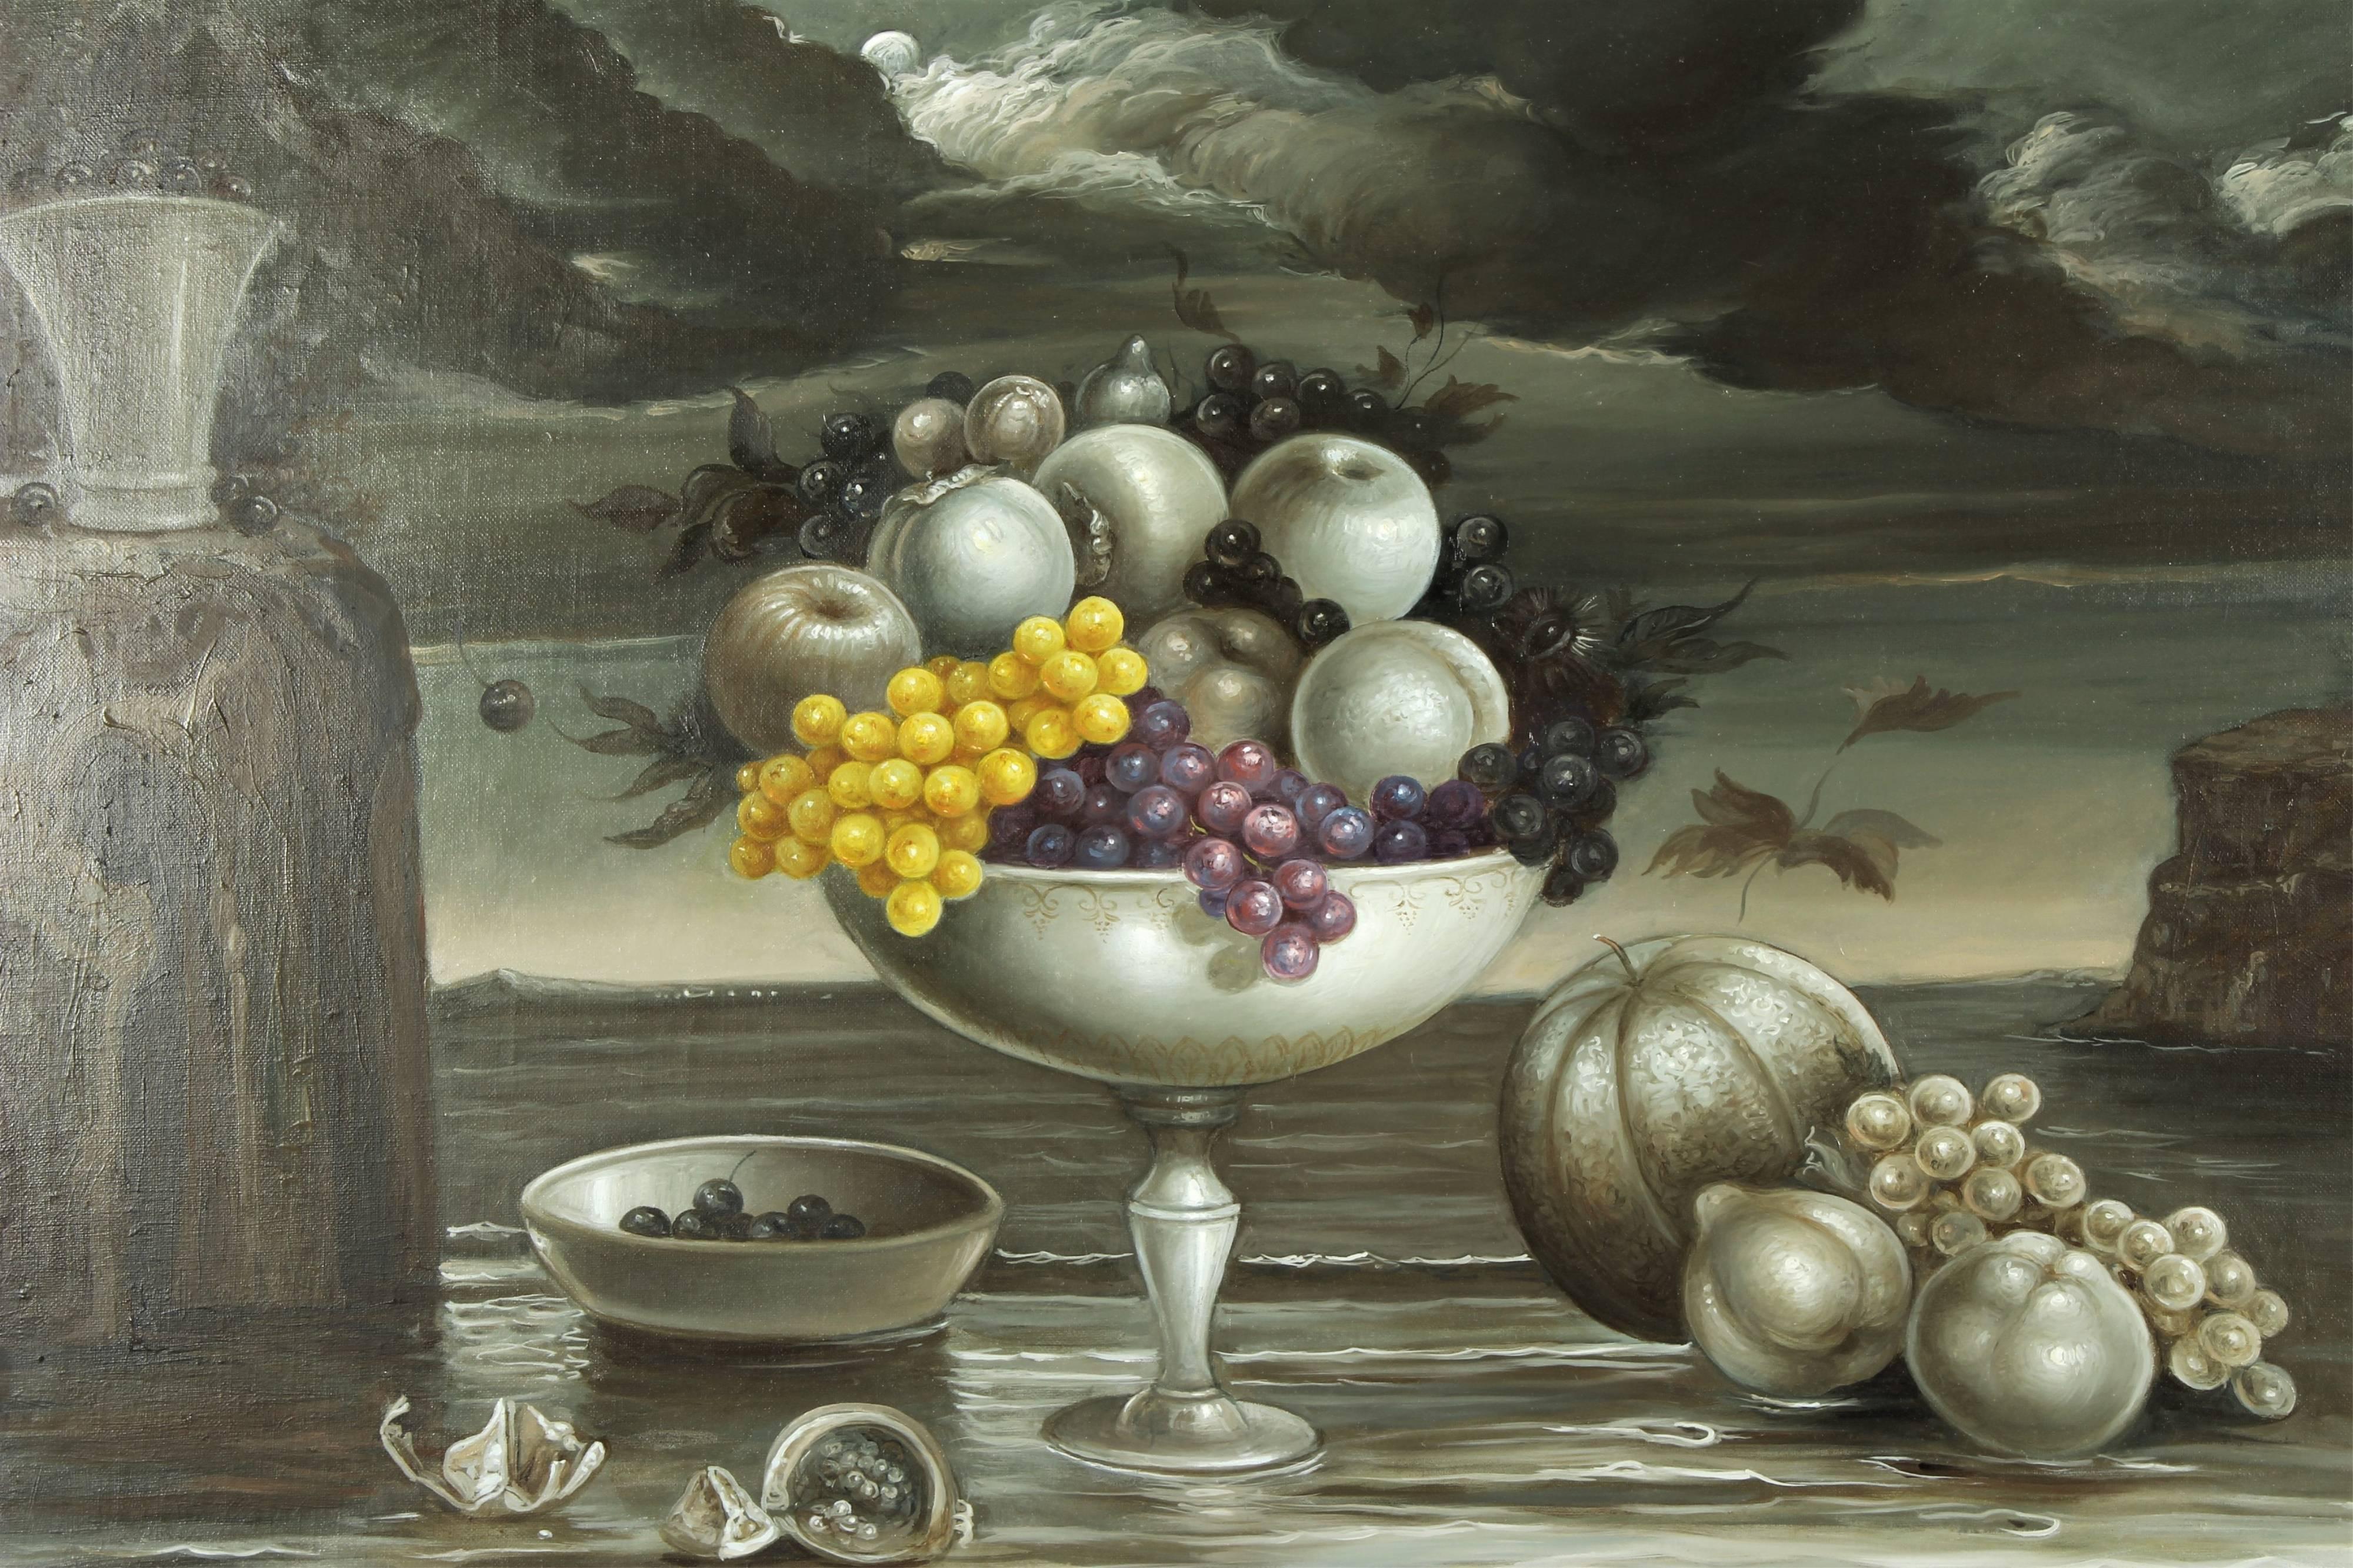 Cacace Filippo, Italian, born in 1959. Still life with grapes, oil on canvas. Signed lower right hand side of the canvas then titled and signed again on verso. This piece is from the Cascone Collection of Arts and Antiques.